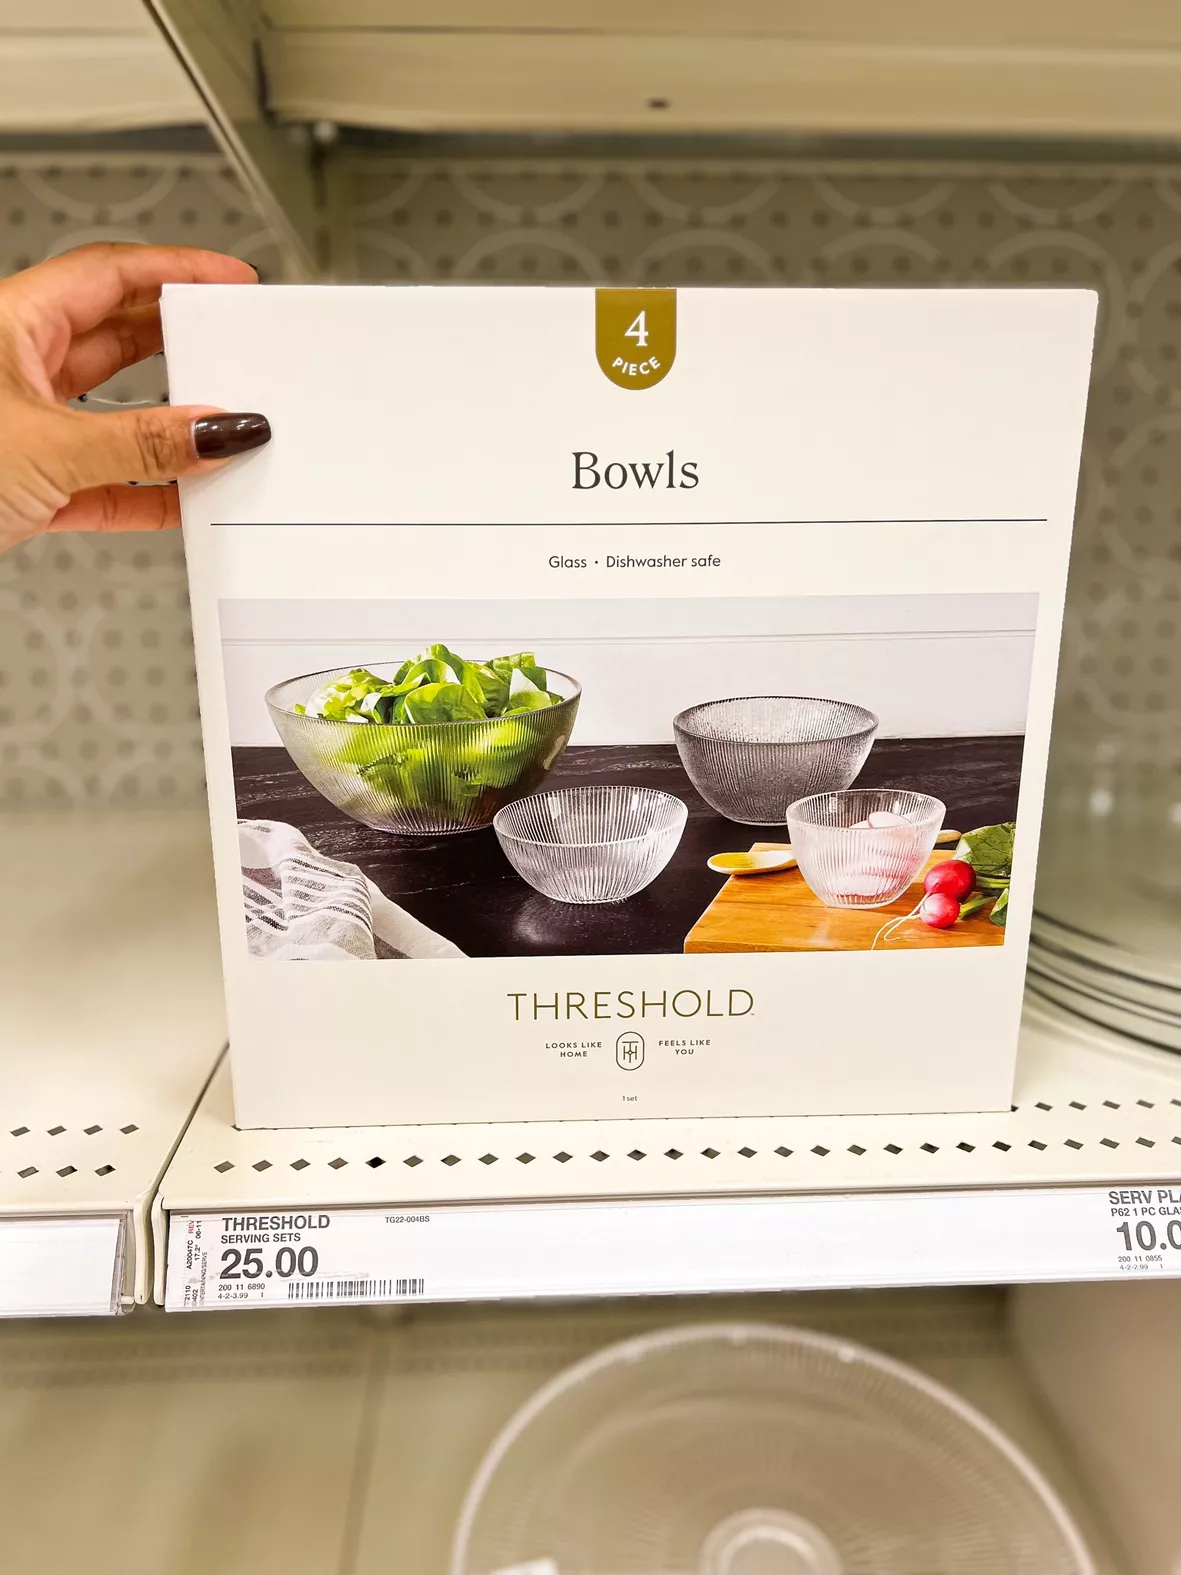 Glass Bowls With Lids : Target